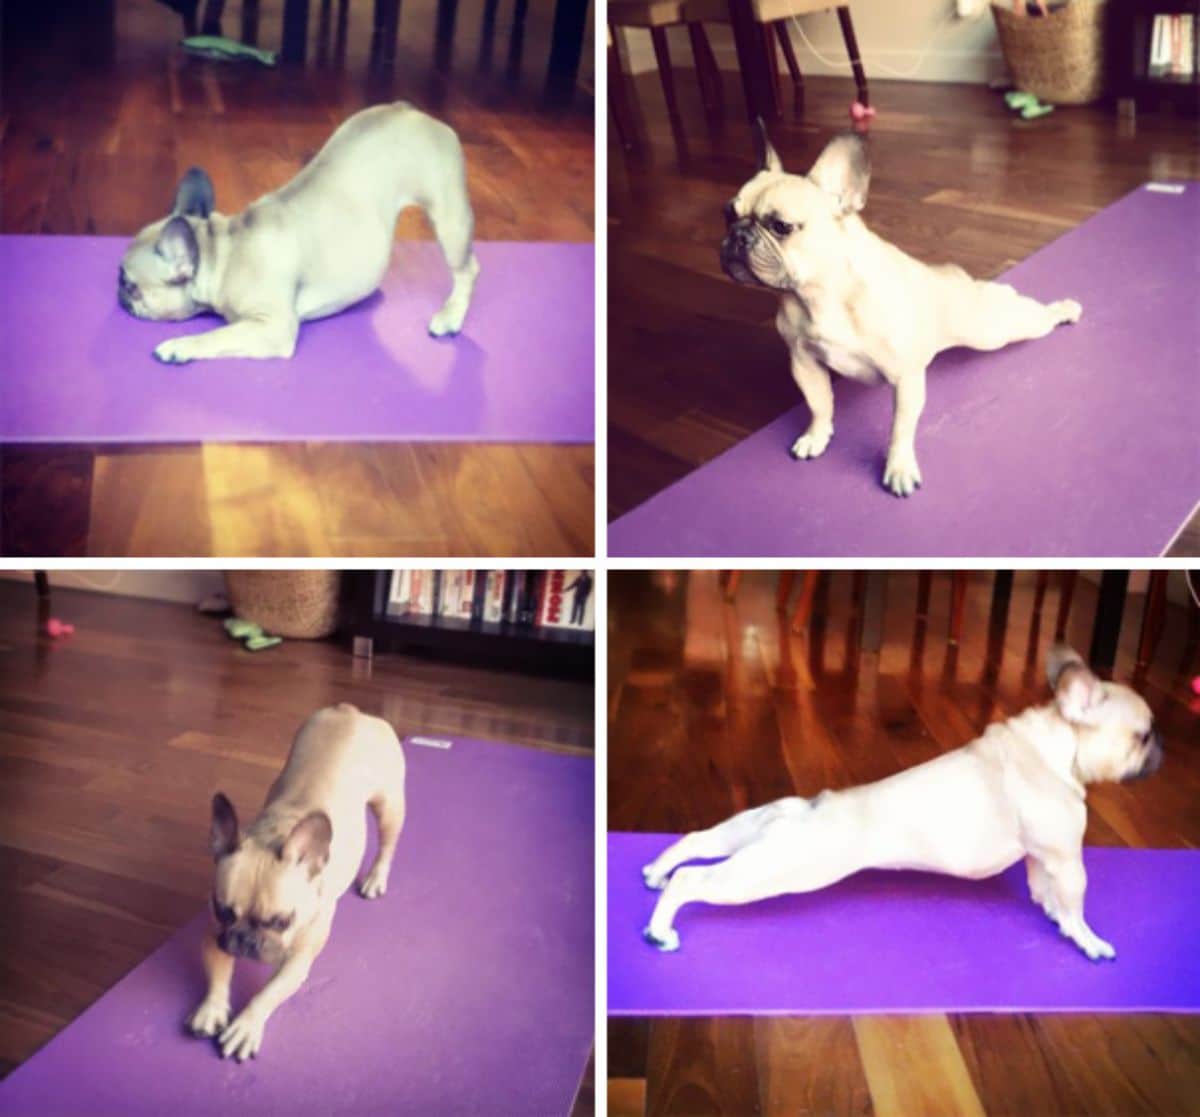 4 photos of a brown french bulldog doing yoga poses on a purple yoga mat